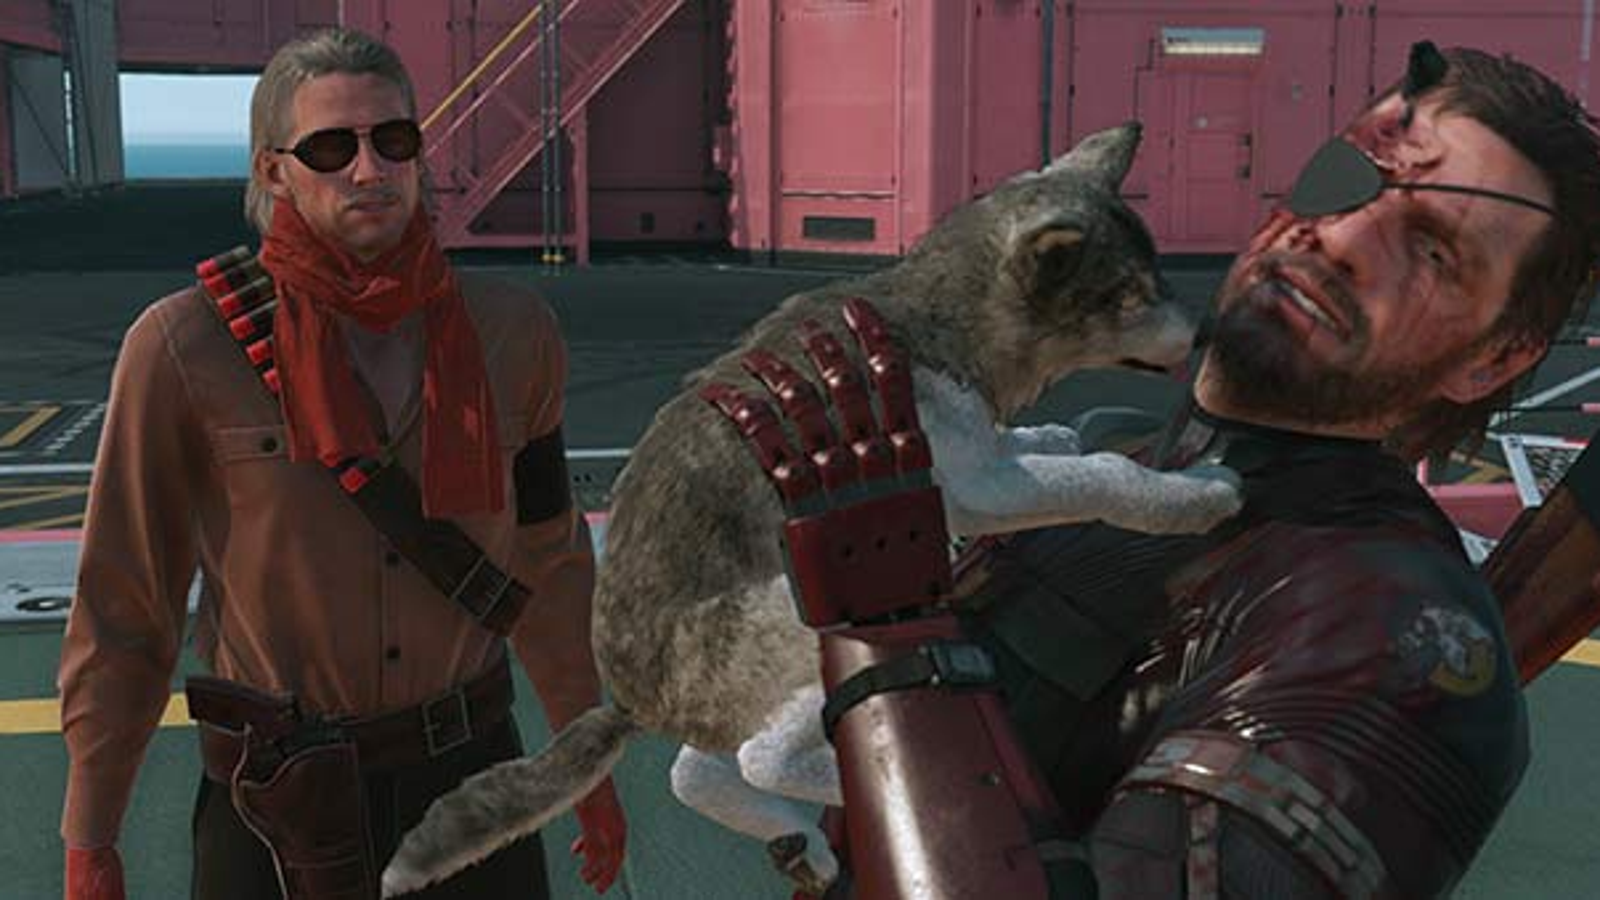 Have You Played Metal Gear Solid V: The Phantom Pain?